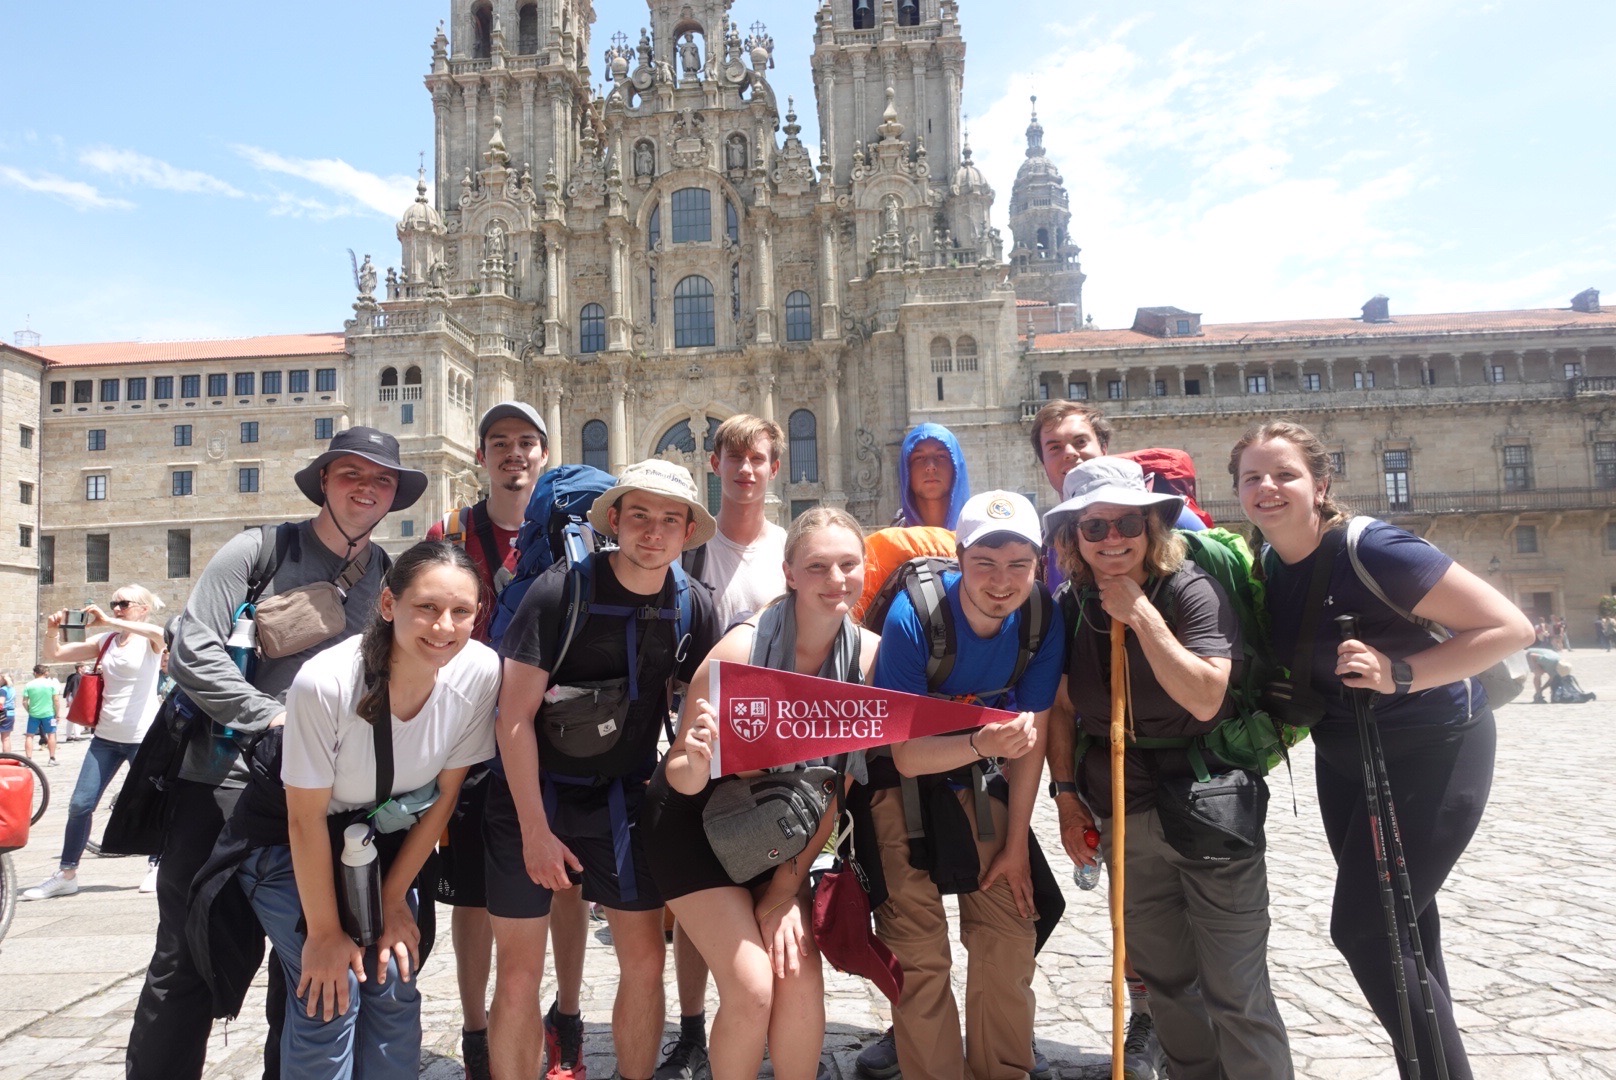 students smiling for a group photo with a roanoke college pennant flag during an immersive learning trip to europe